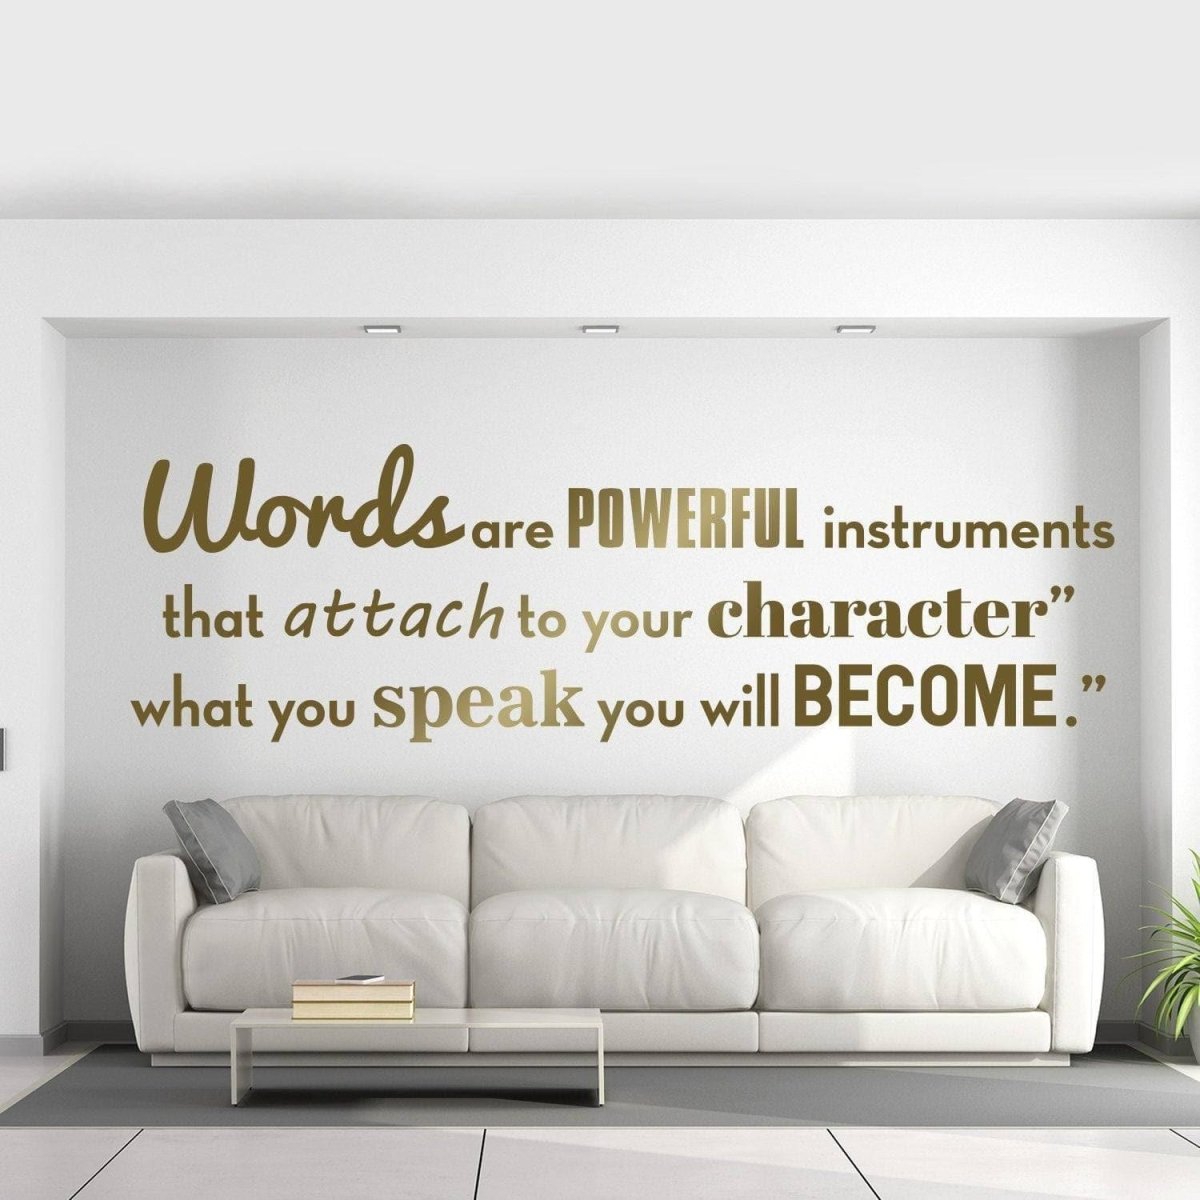 "Inspire and Elevate" Motivational Wall Vinyl Decal - Optimal for Personal Inspiration - Decords